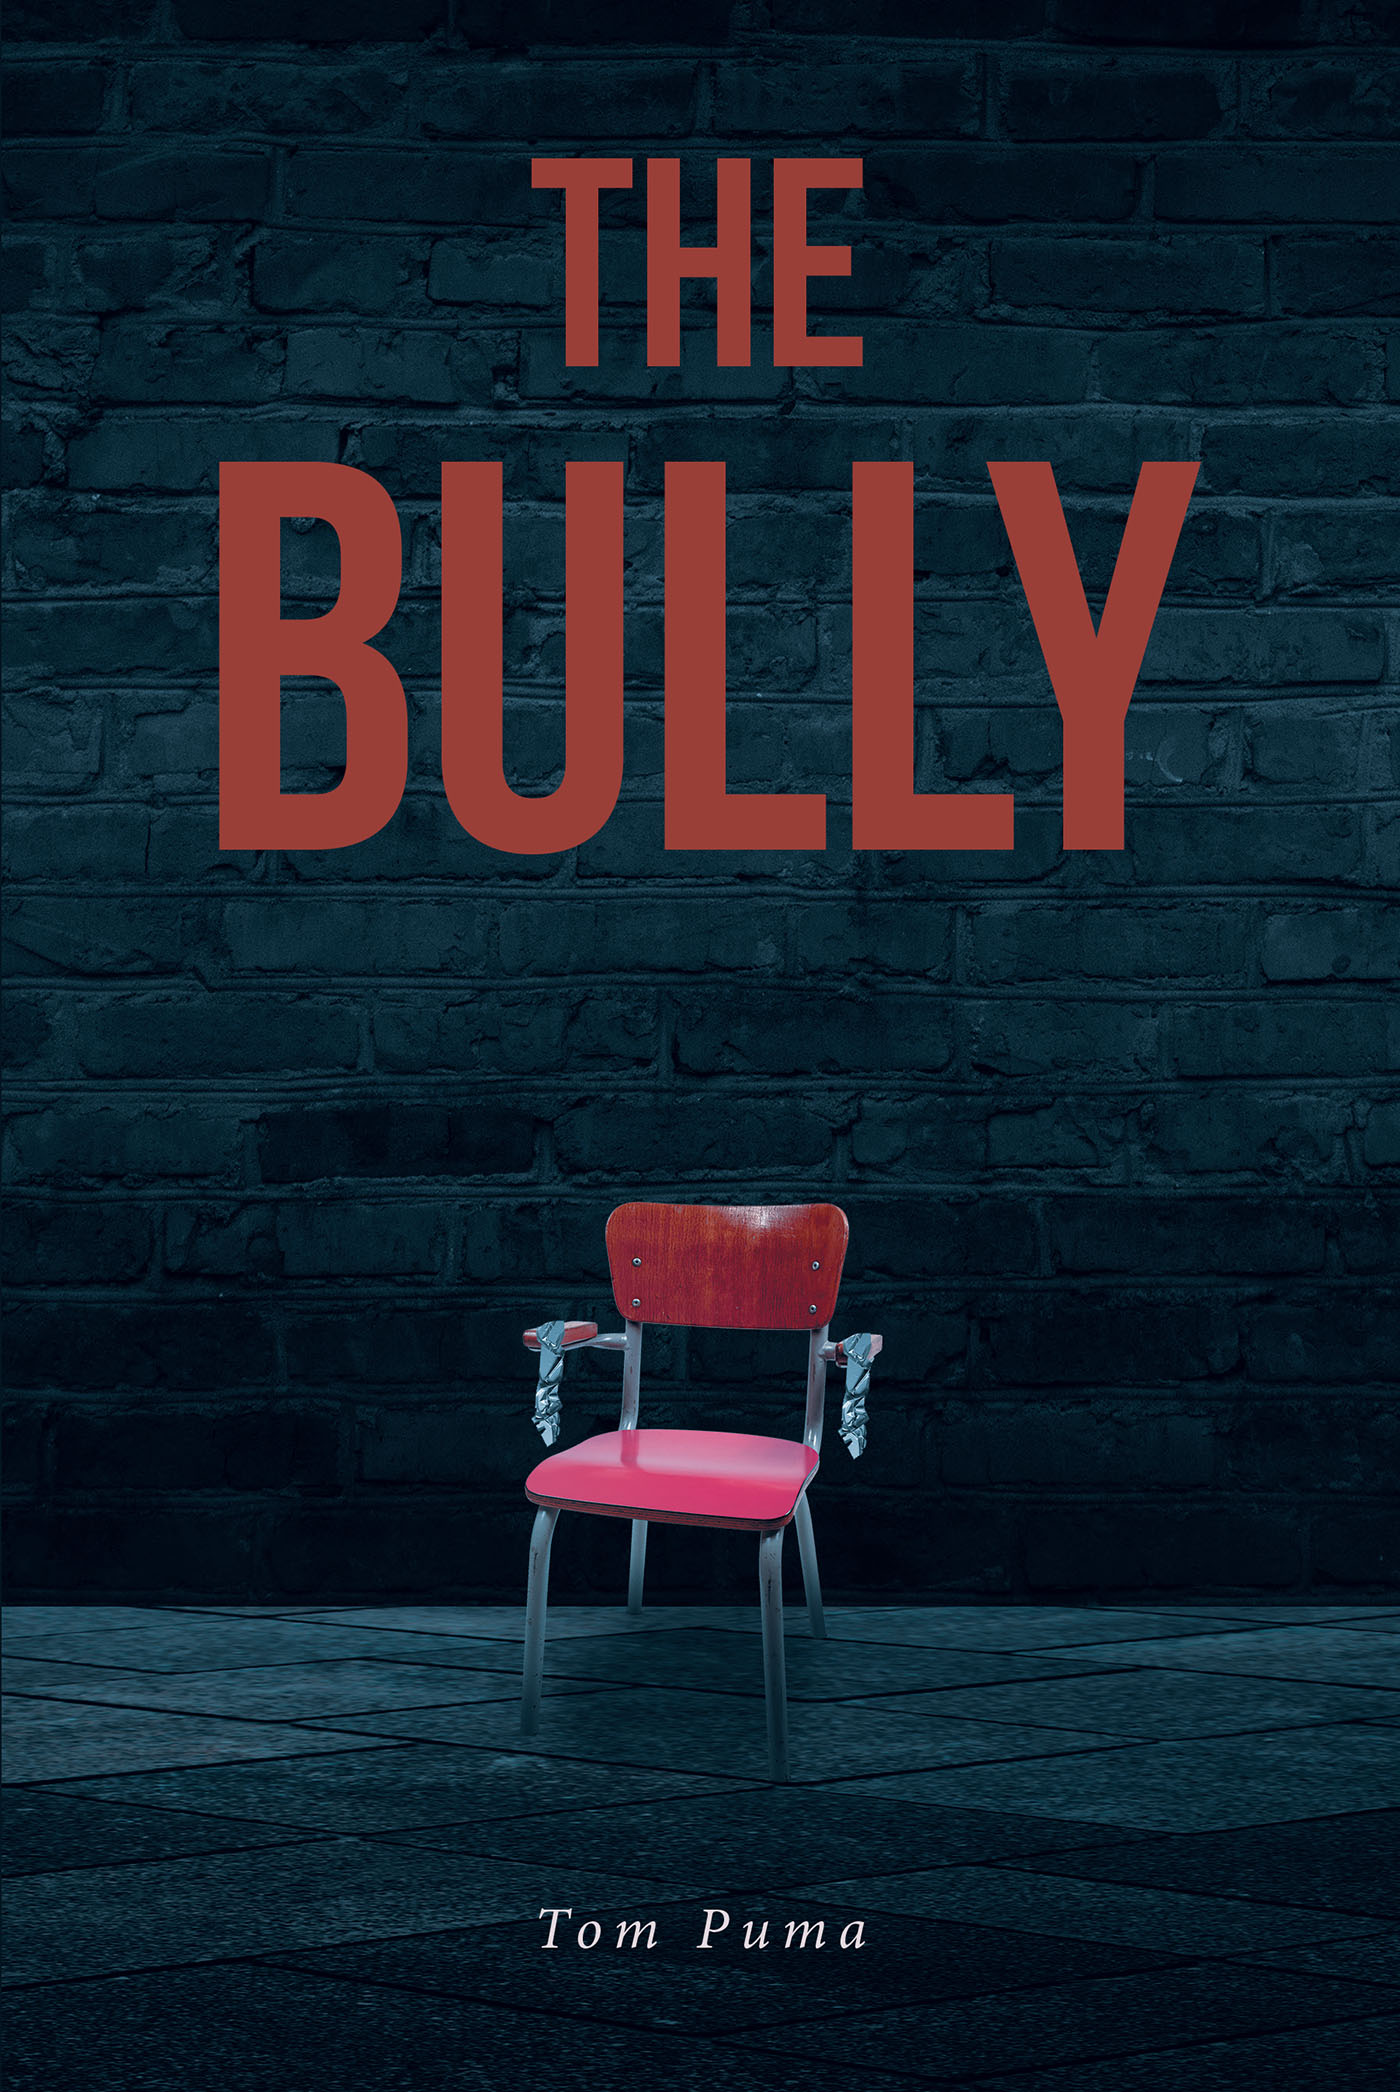 Tom Puma’s New Book, "The Bully," Follows a Retired Firefighter Who Must Solve the Murder of His Former School Bully Whose Body is Discovered Hidden in Their Old School